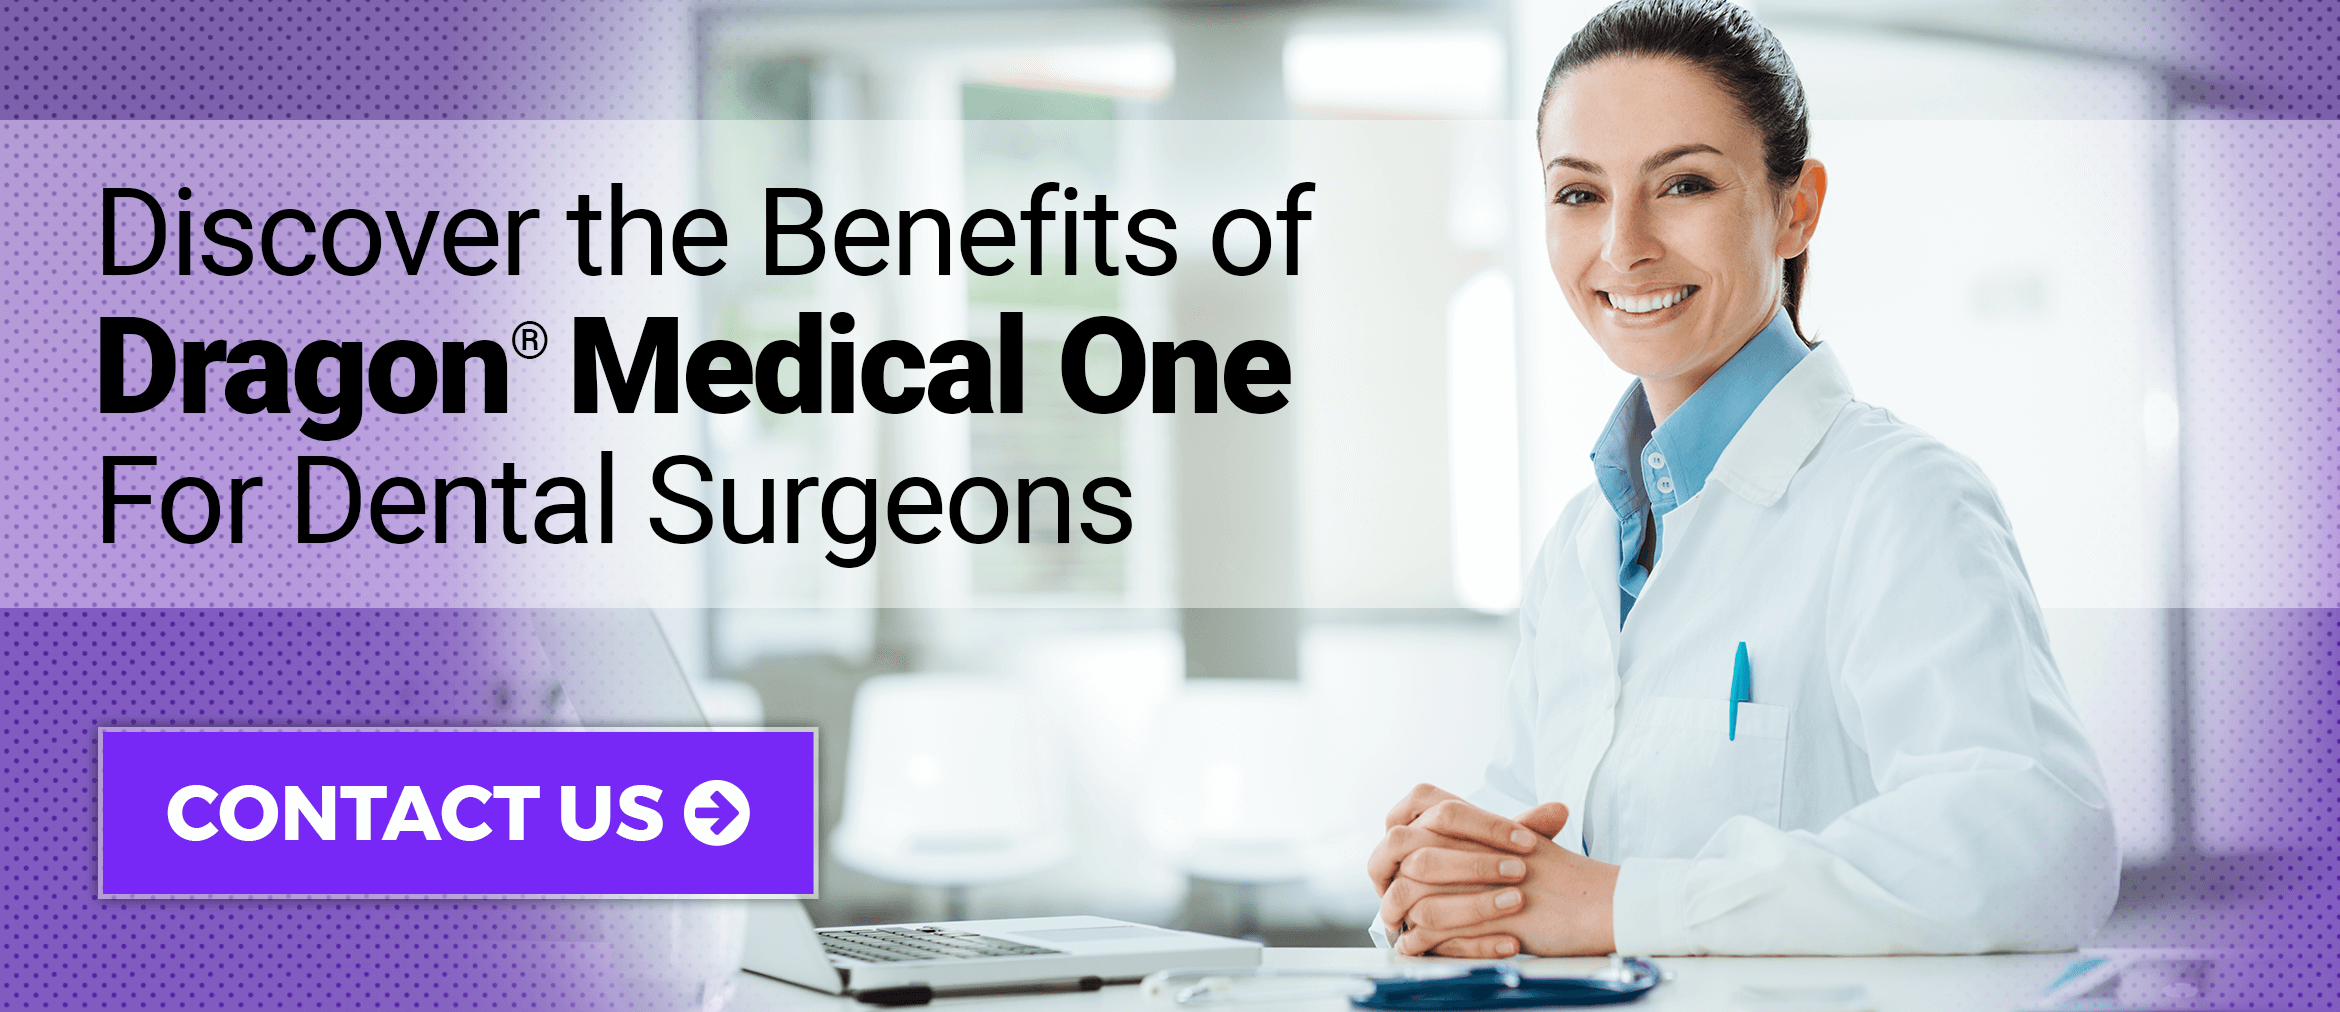 Discover the benefits of Dragon Medical One for